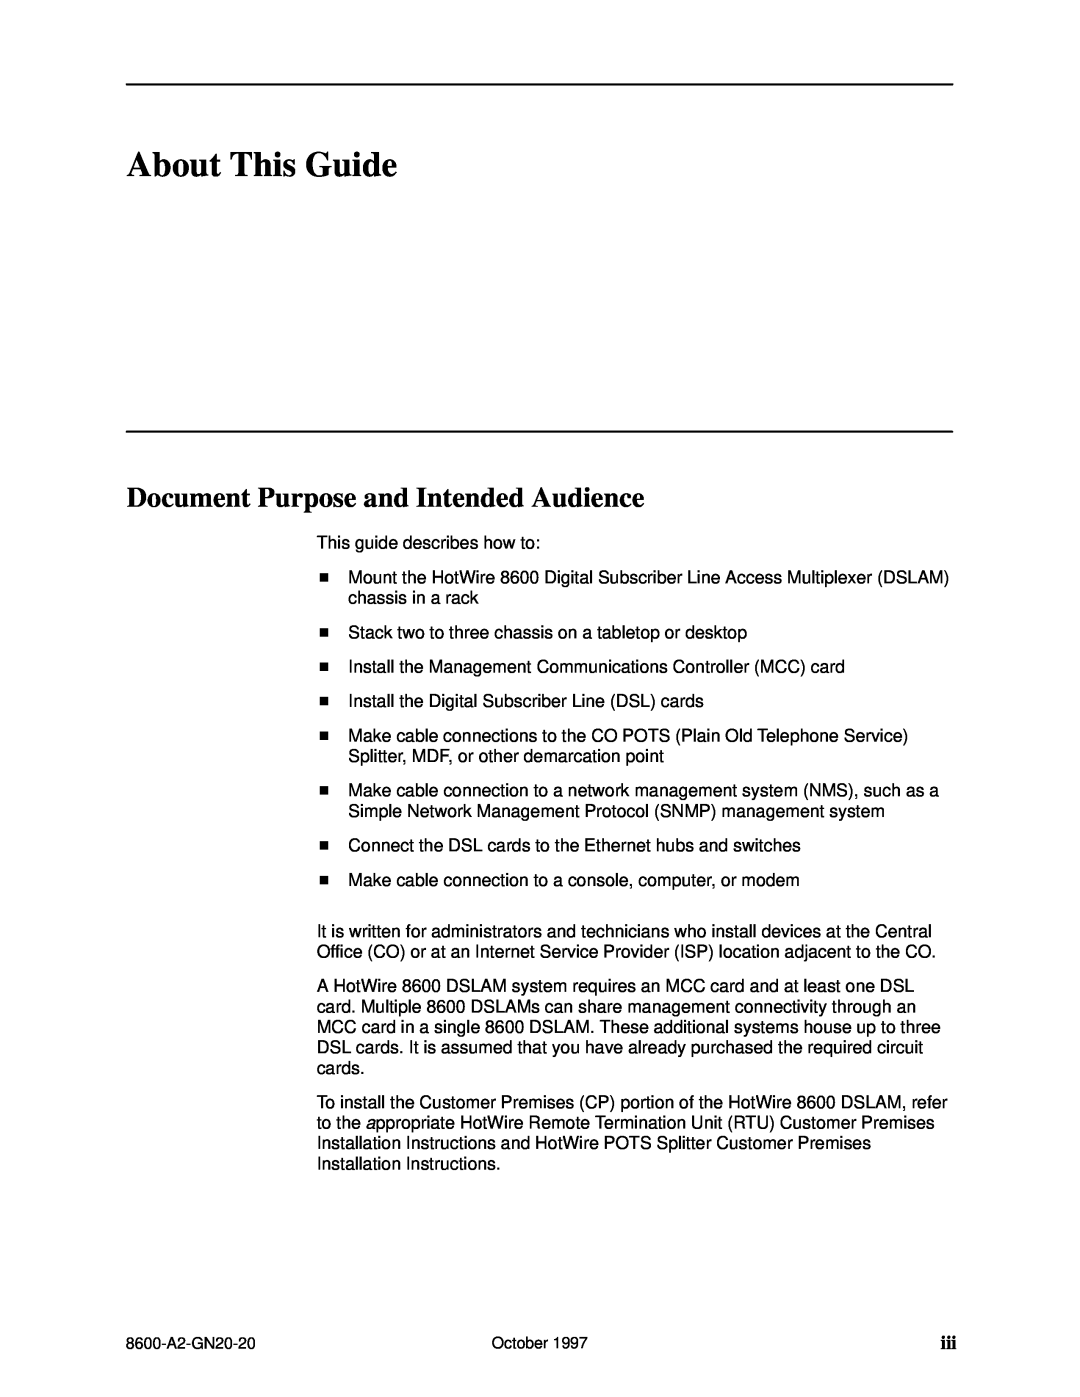 Nortel Networks 8600 manual About This Guide, Document Purpose and Intended Audience 